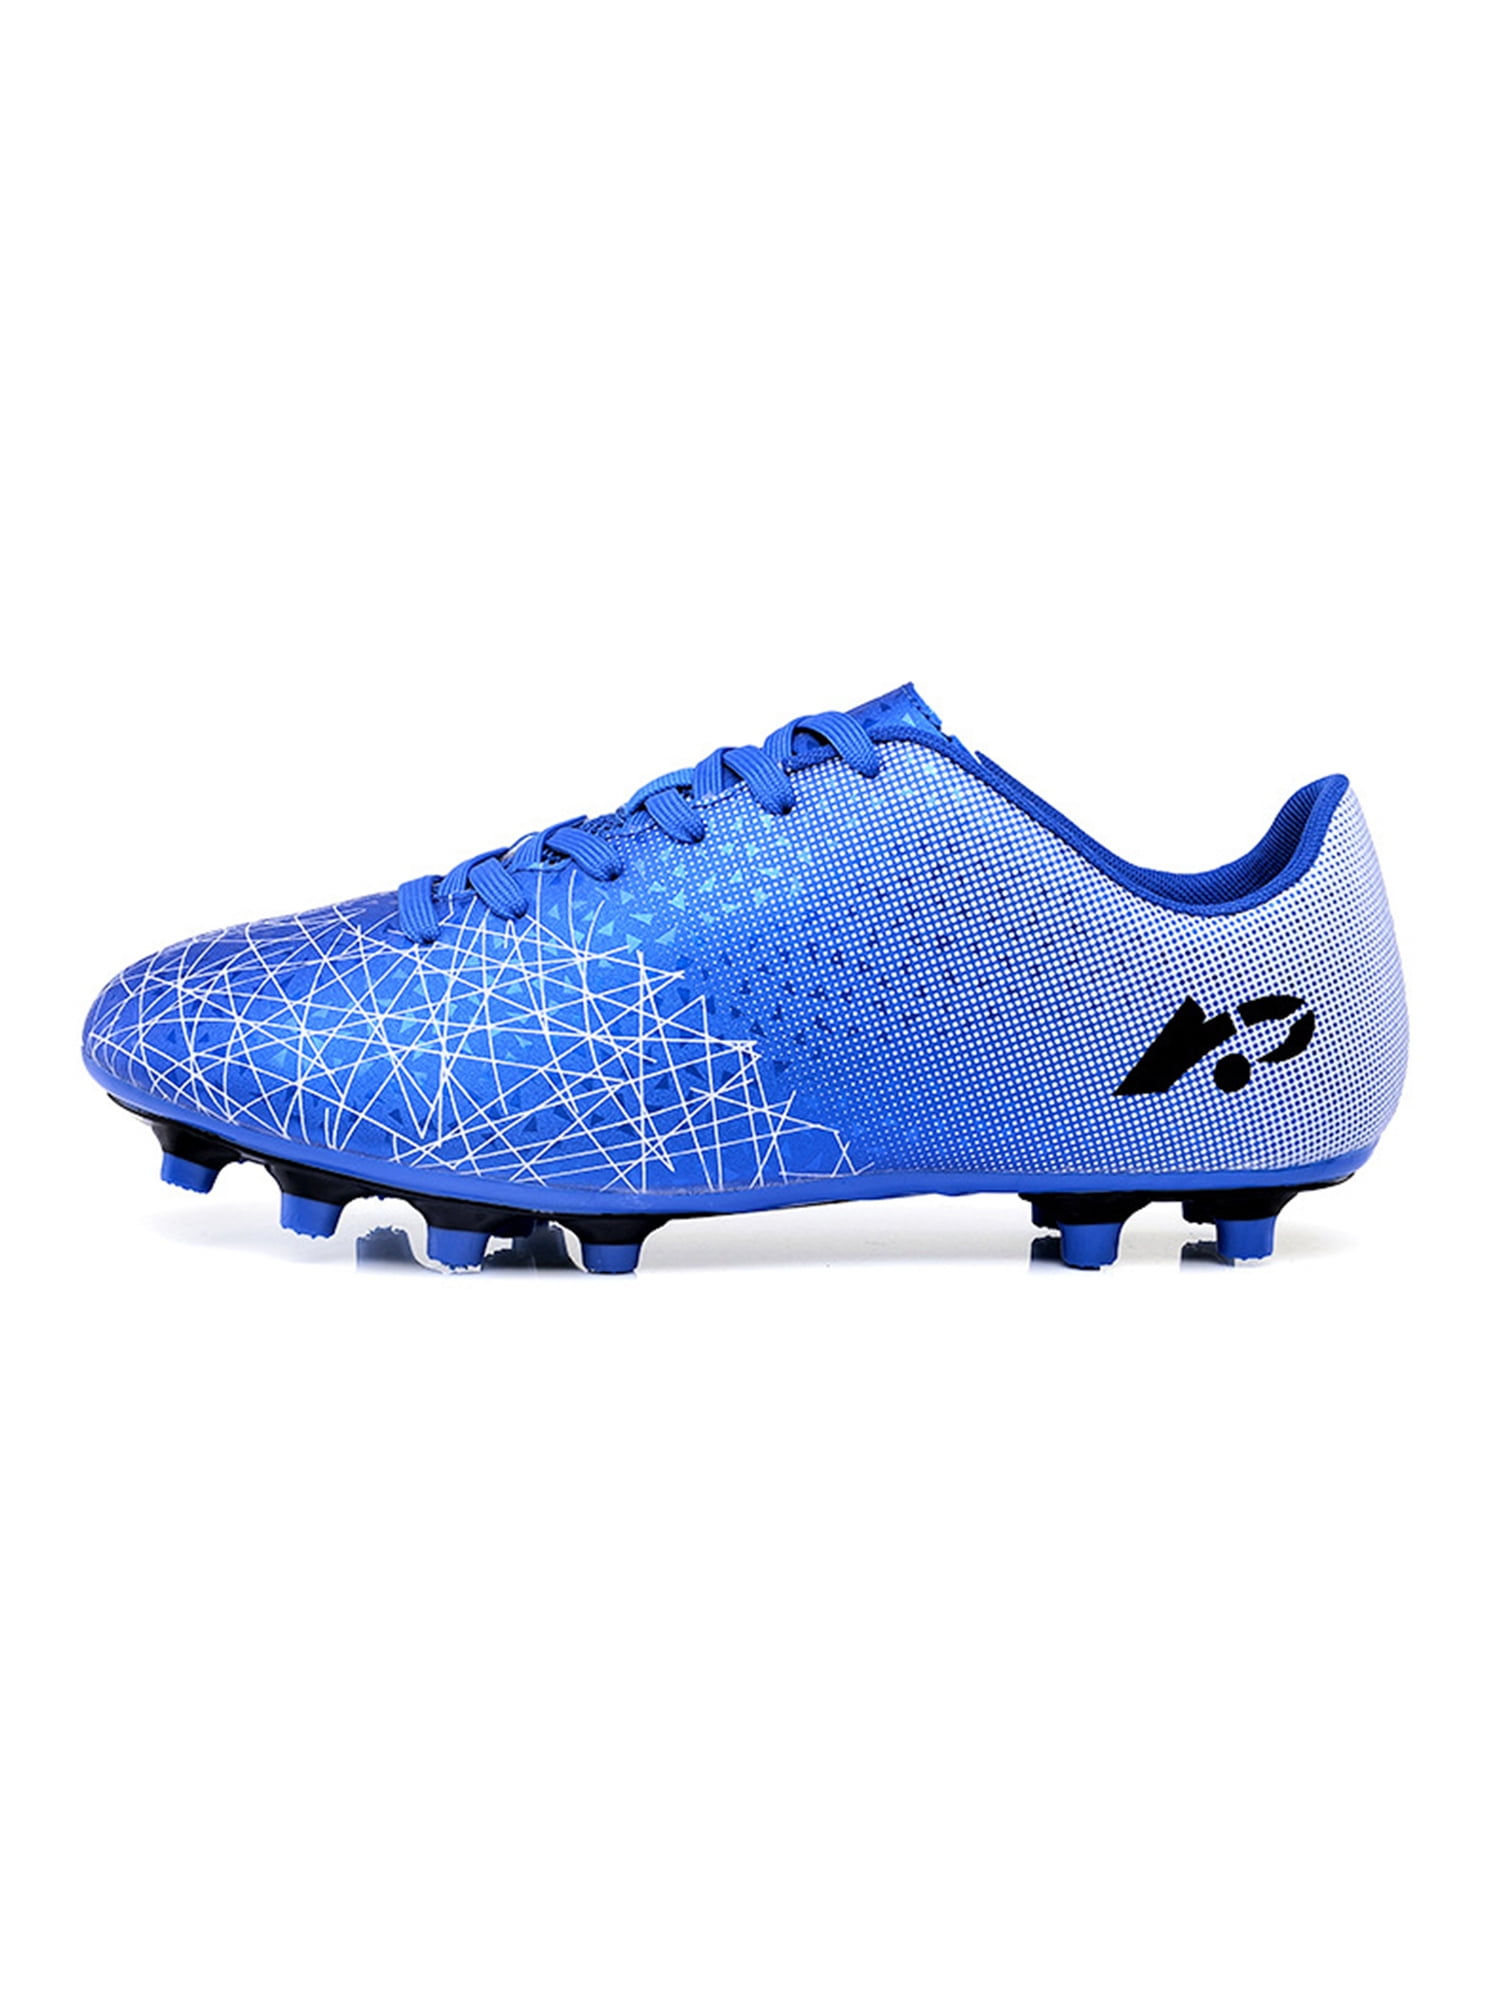 Men Boys Soccer Cleats Shoes Outdoor Football Shoes Sneakers Athletic Fashion 